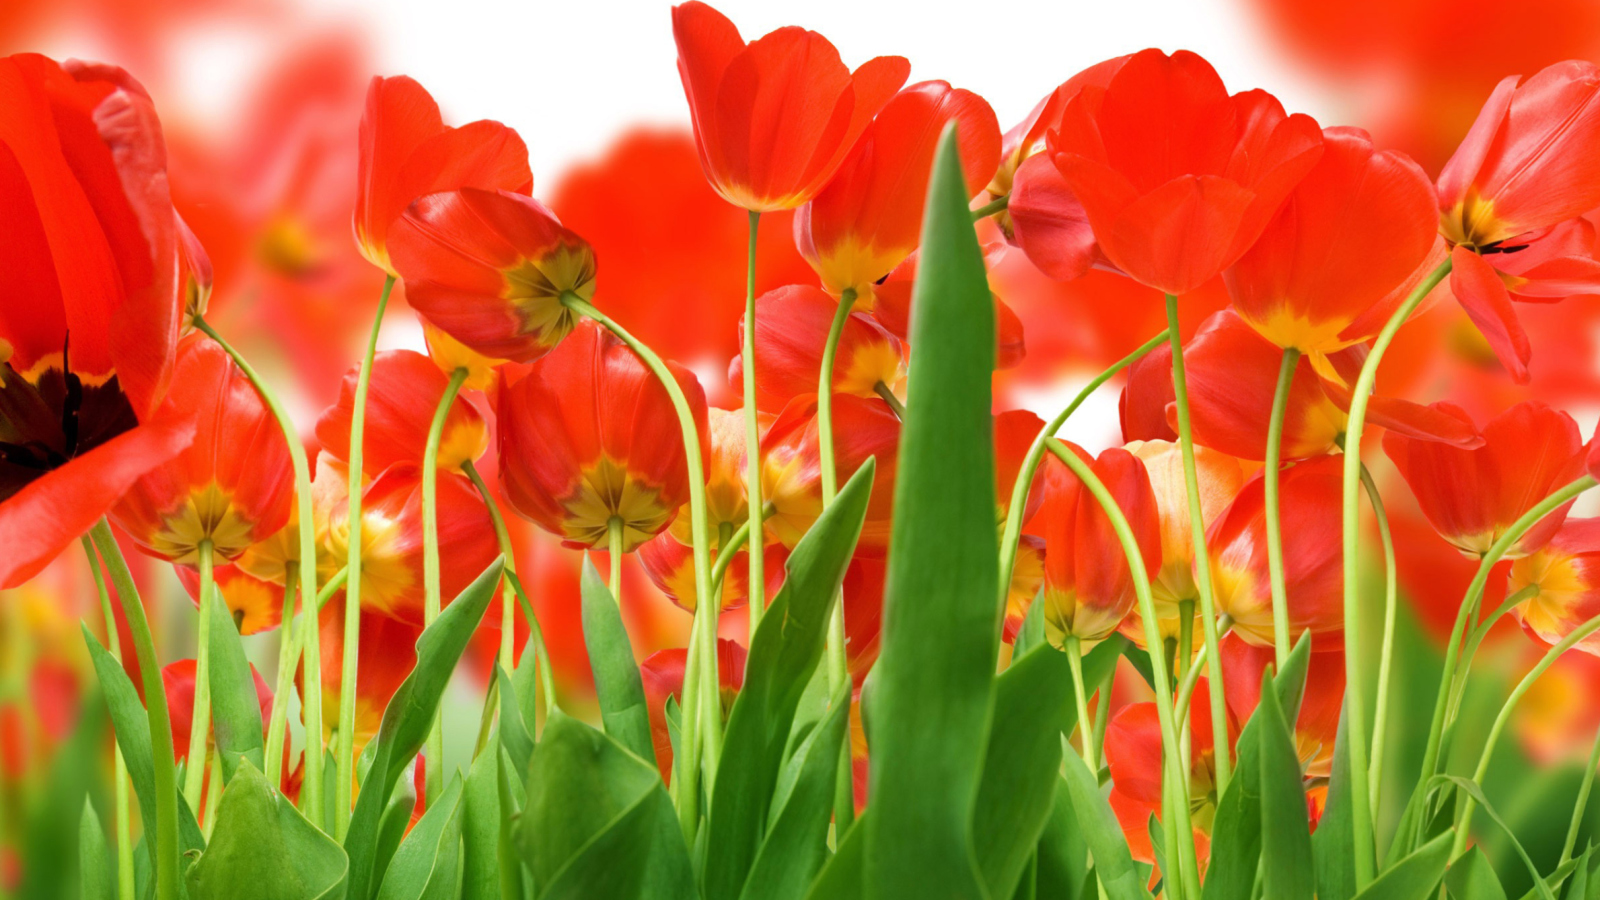 Red Tulips wallpaper 1600x900